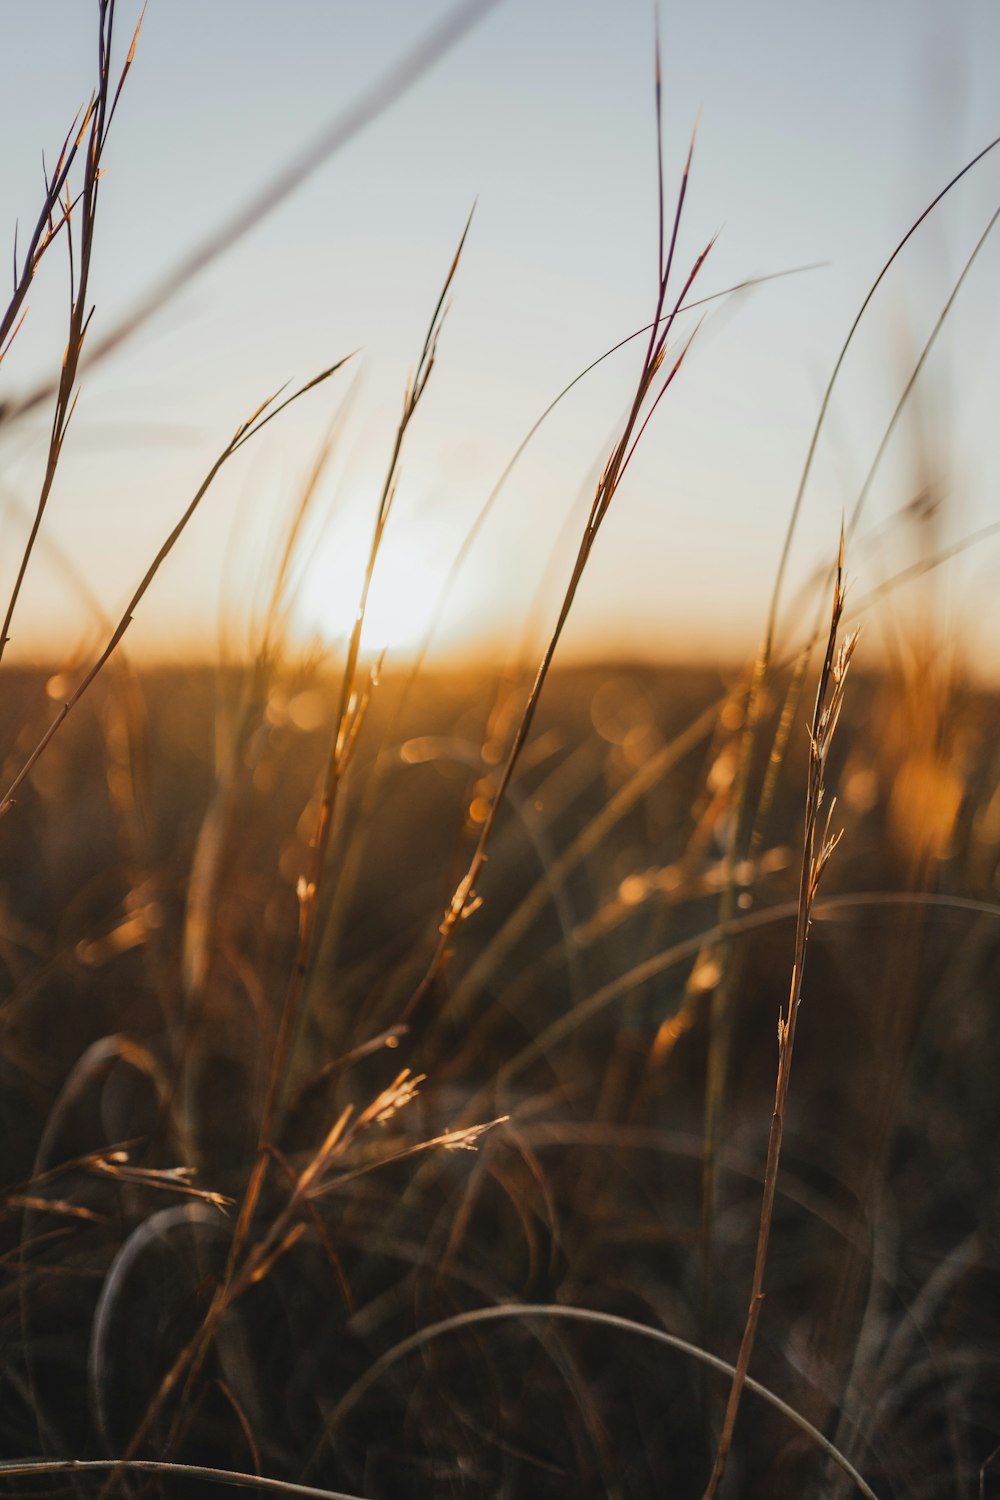 the sun is setting over a field of tall grass